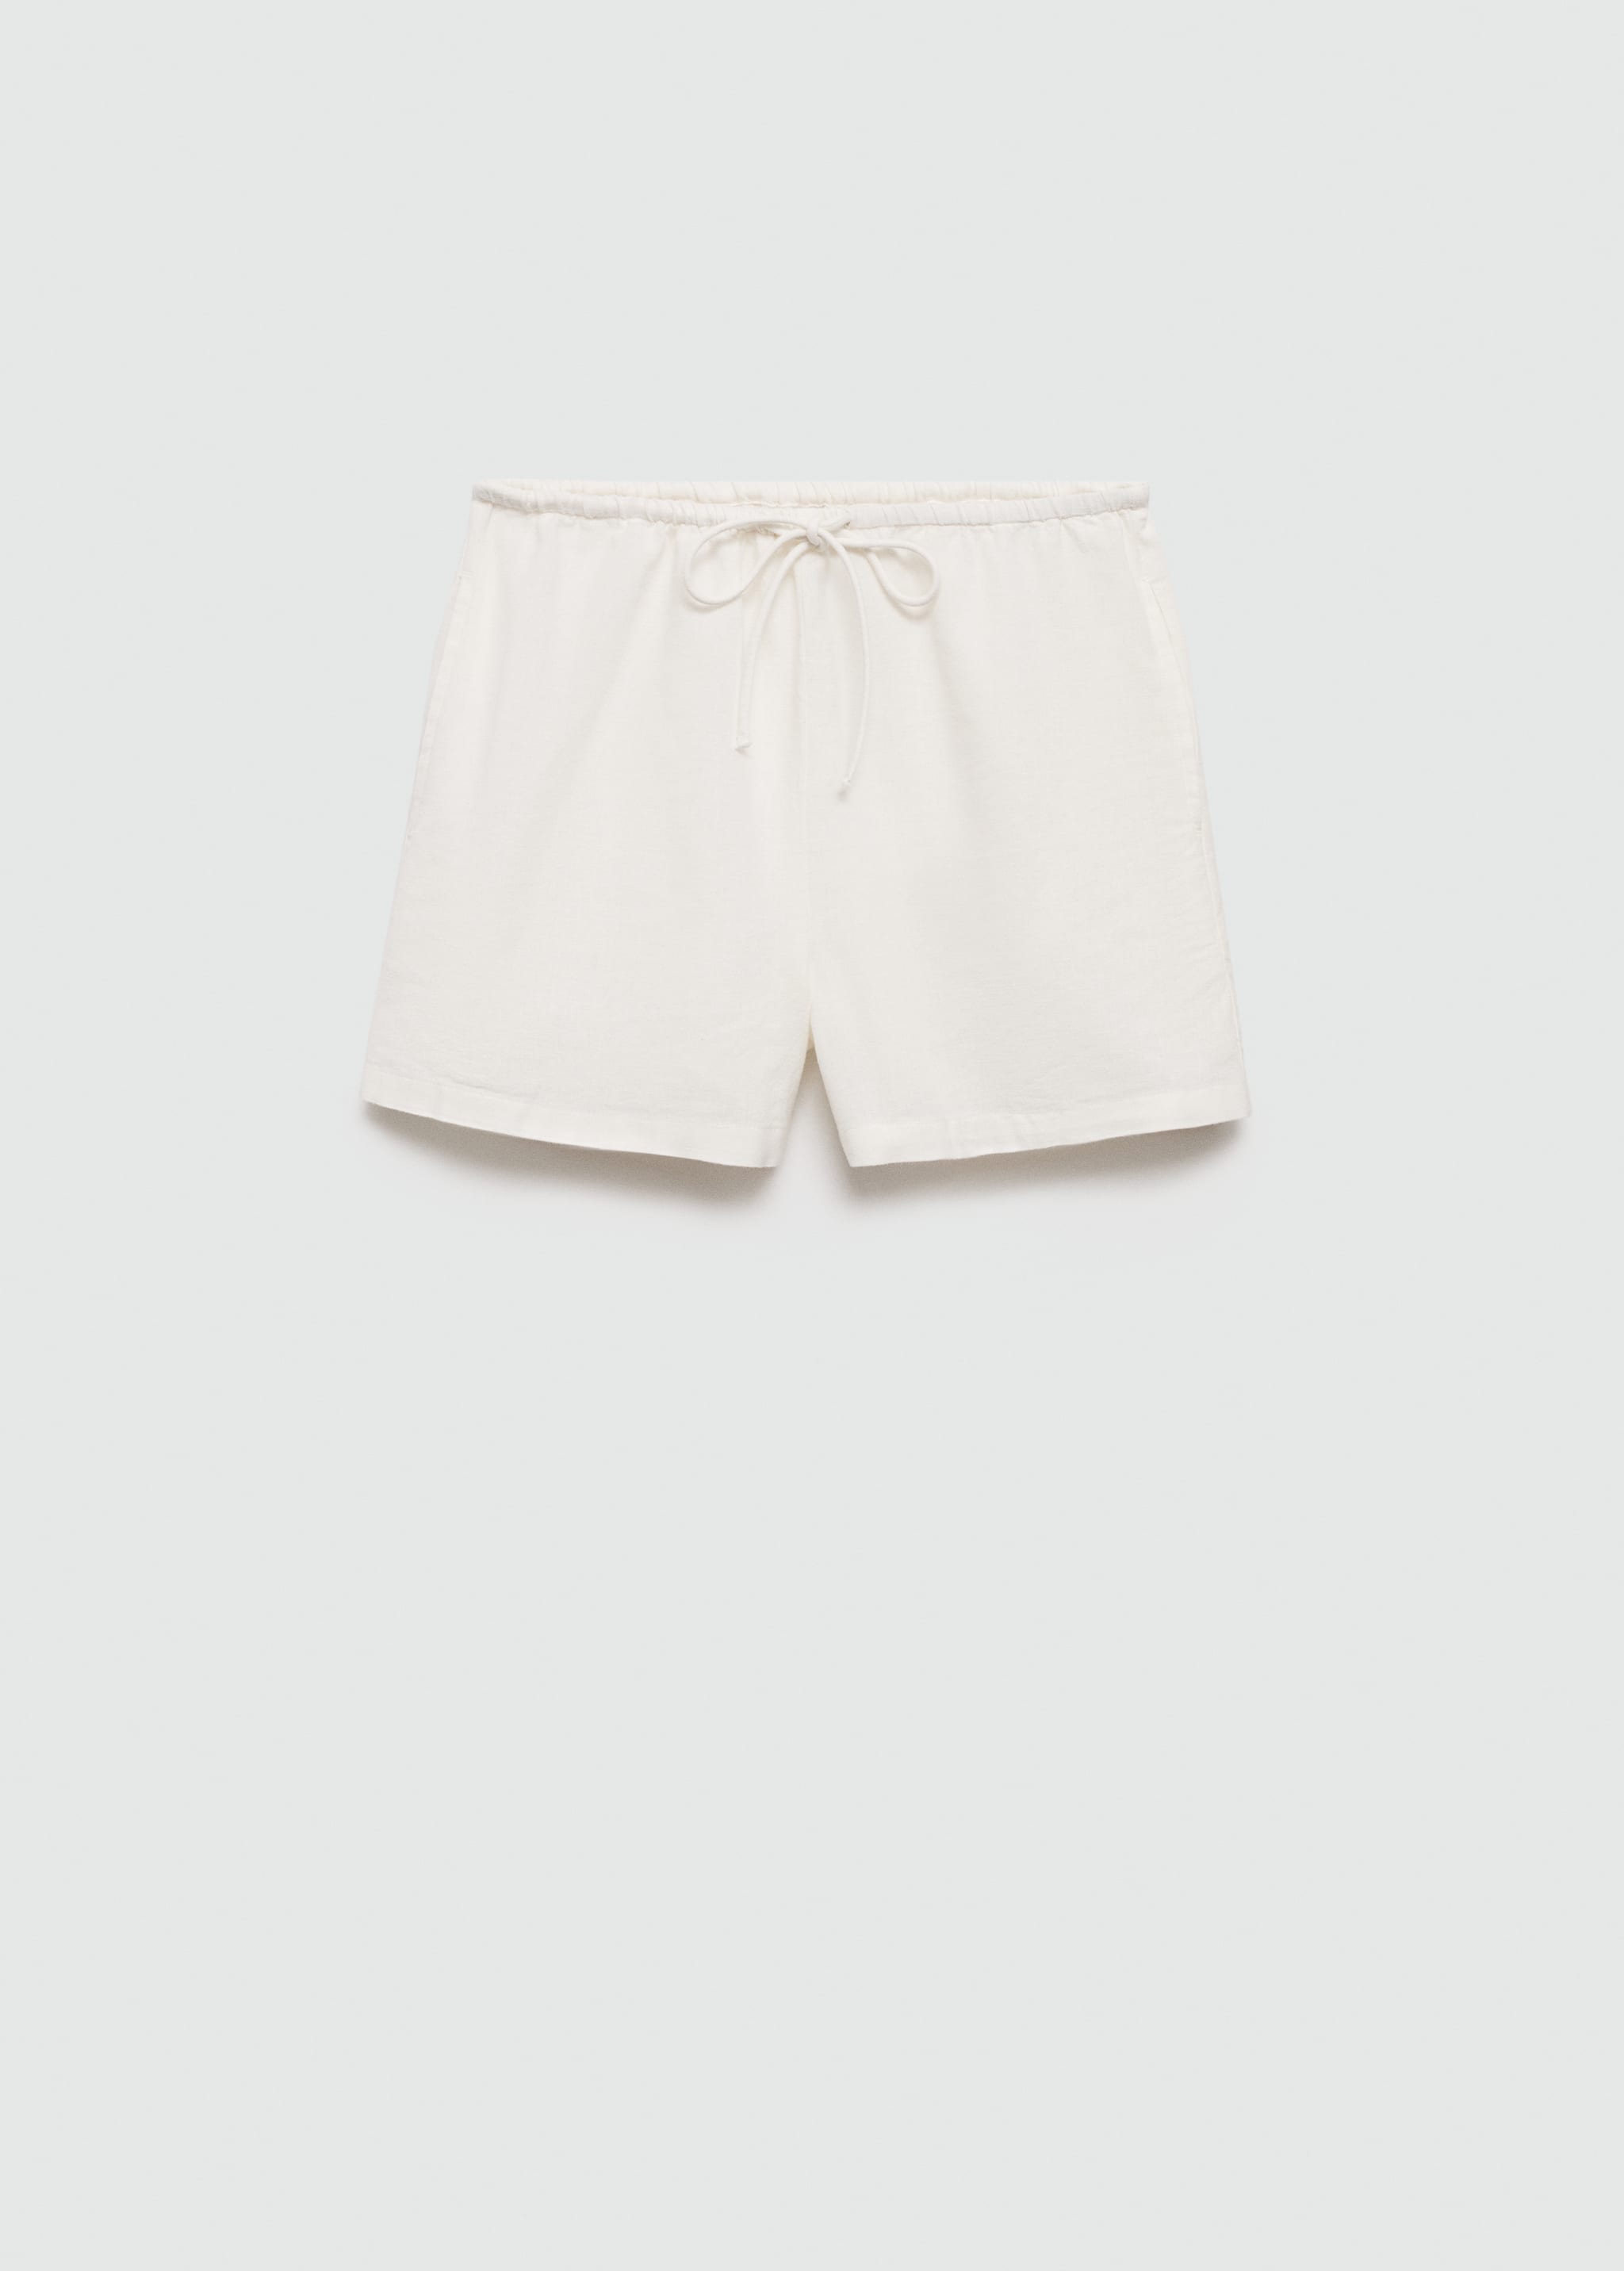 Bow linen short - Article without model